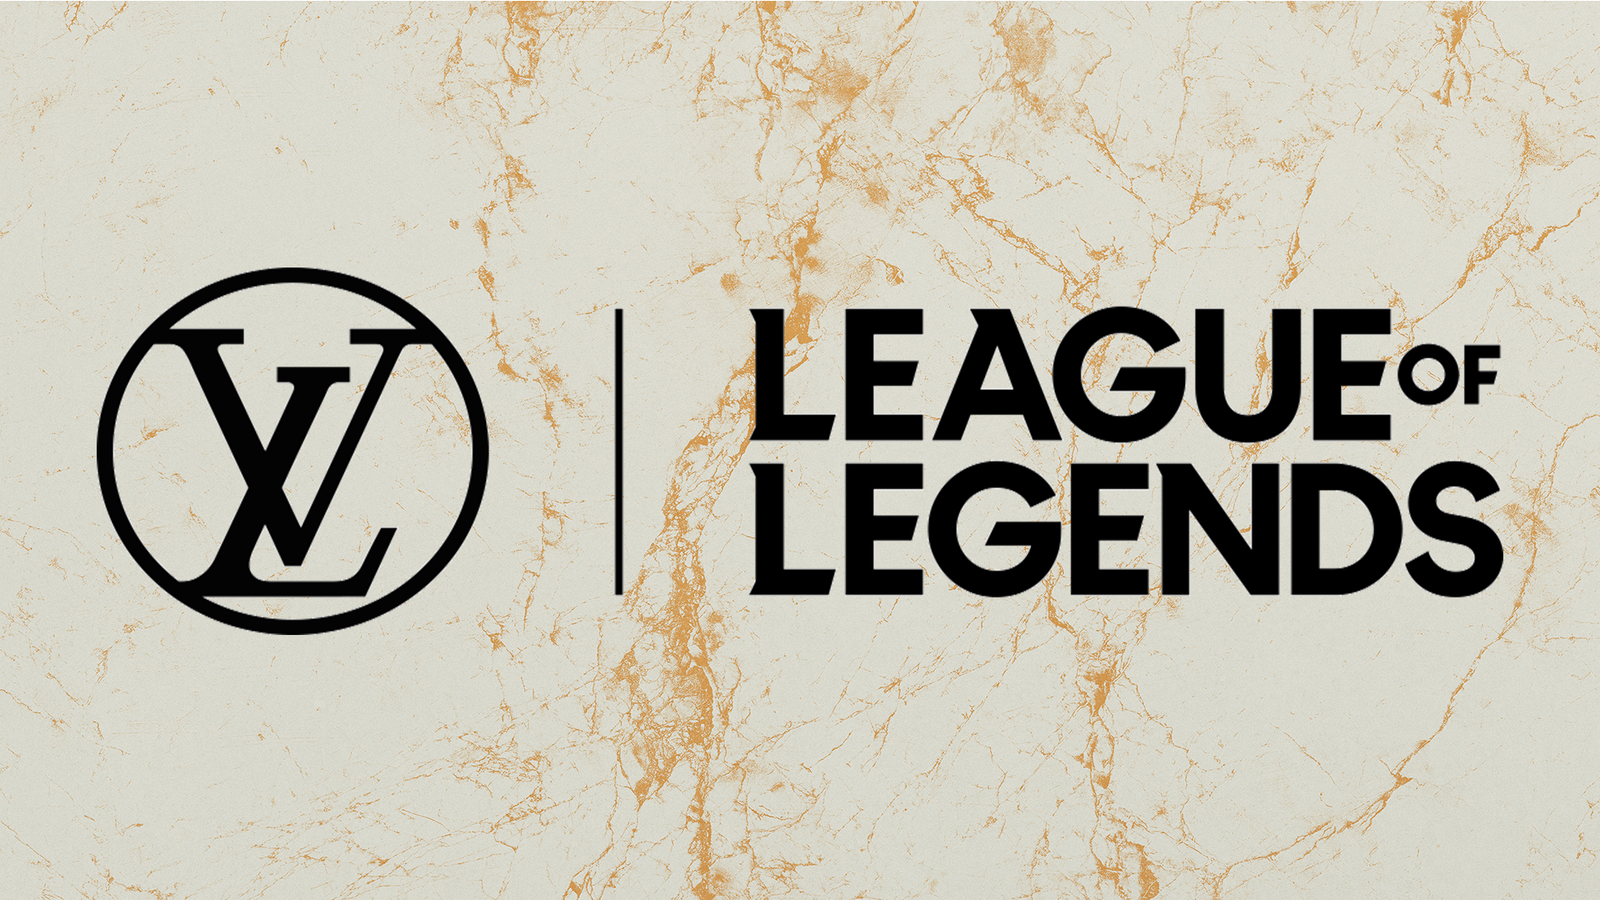 Louis Vuitton x League of Legends: What if you dressed as your